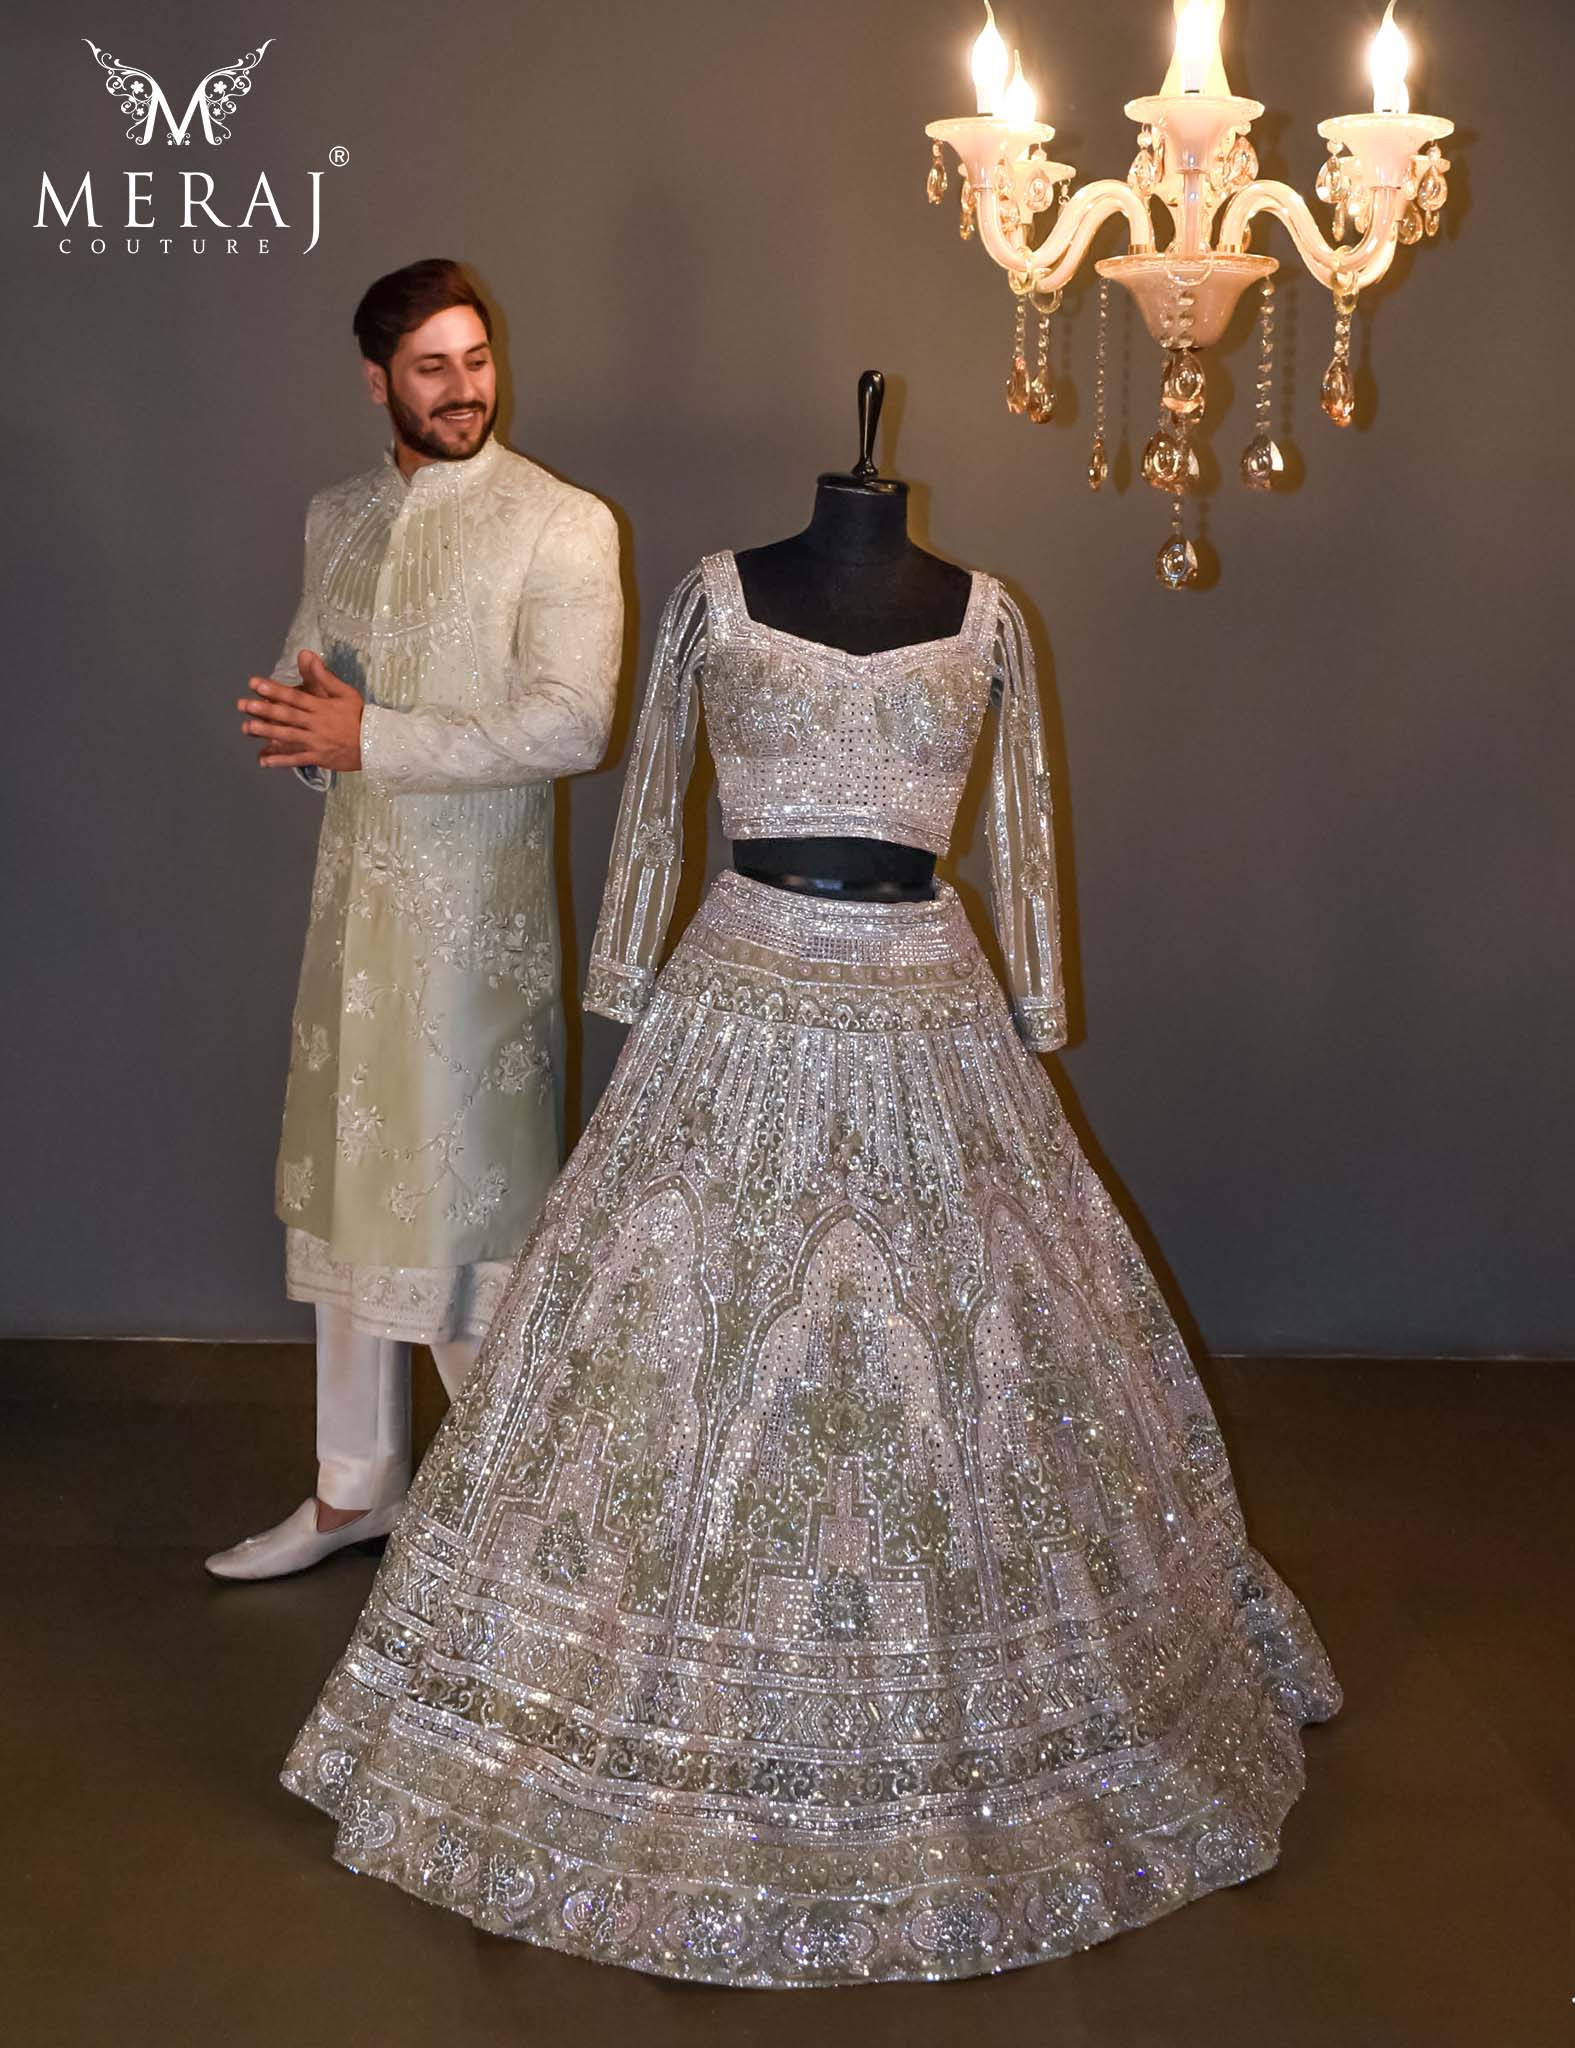 Soft Olive Green Net Bridal Lehenga  paired With A Luxurious Hand-Embroidered Raw Silk Sherwani